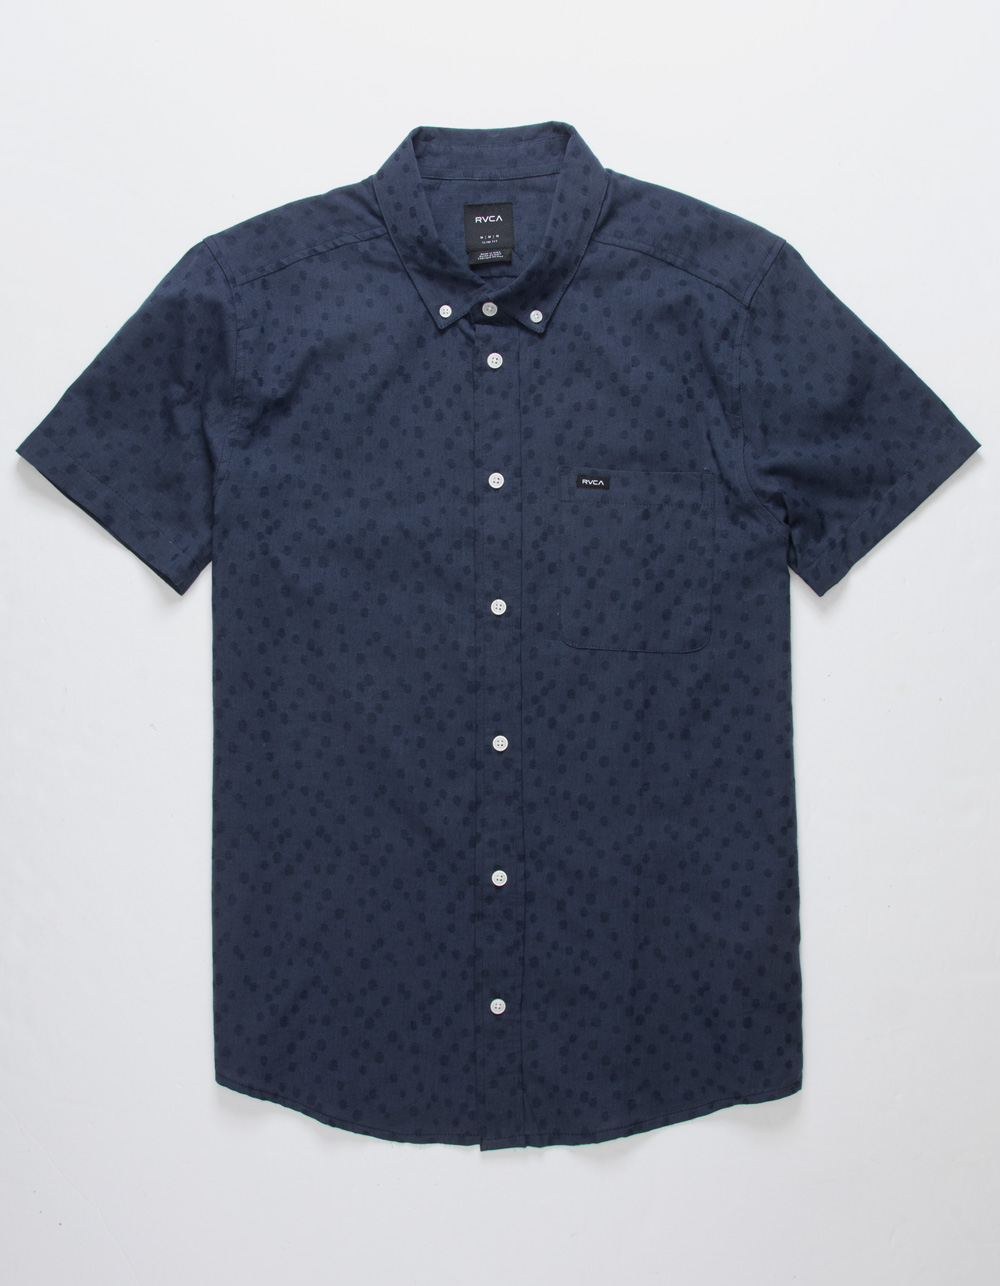 RVCA: Shirts, Clothing, & More | Tillys